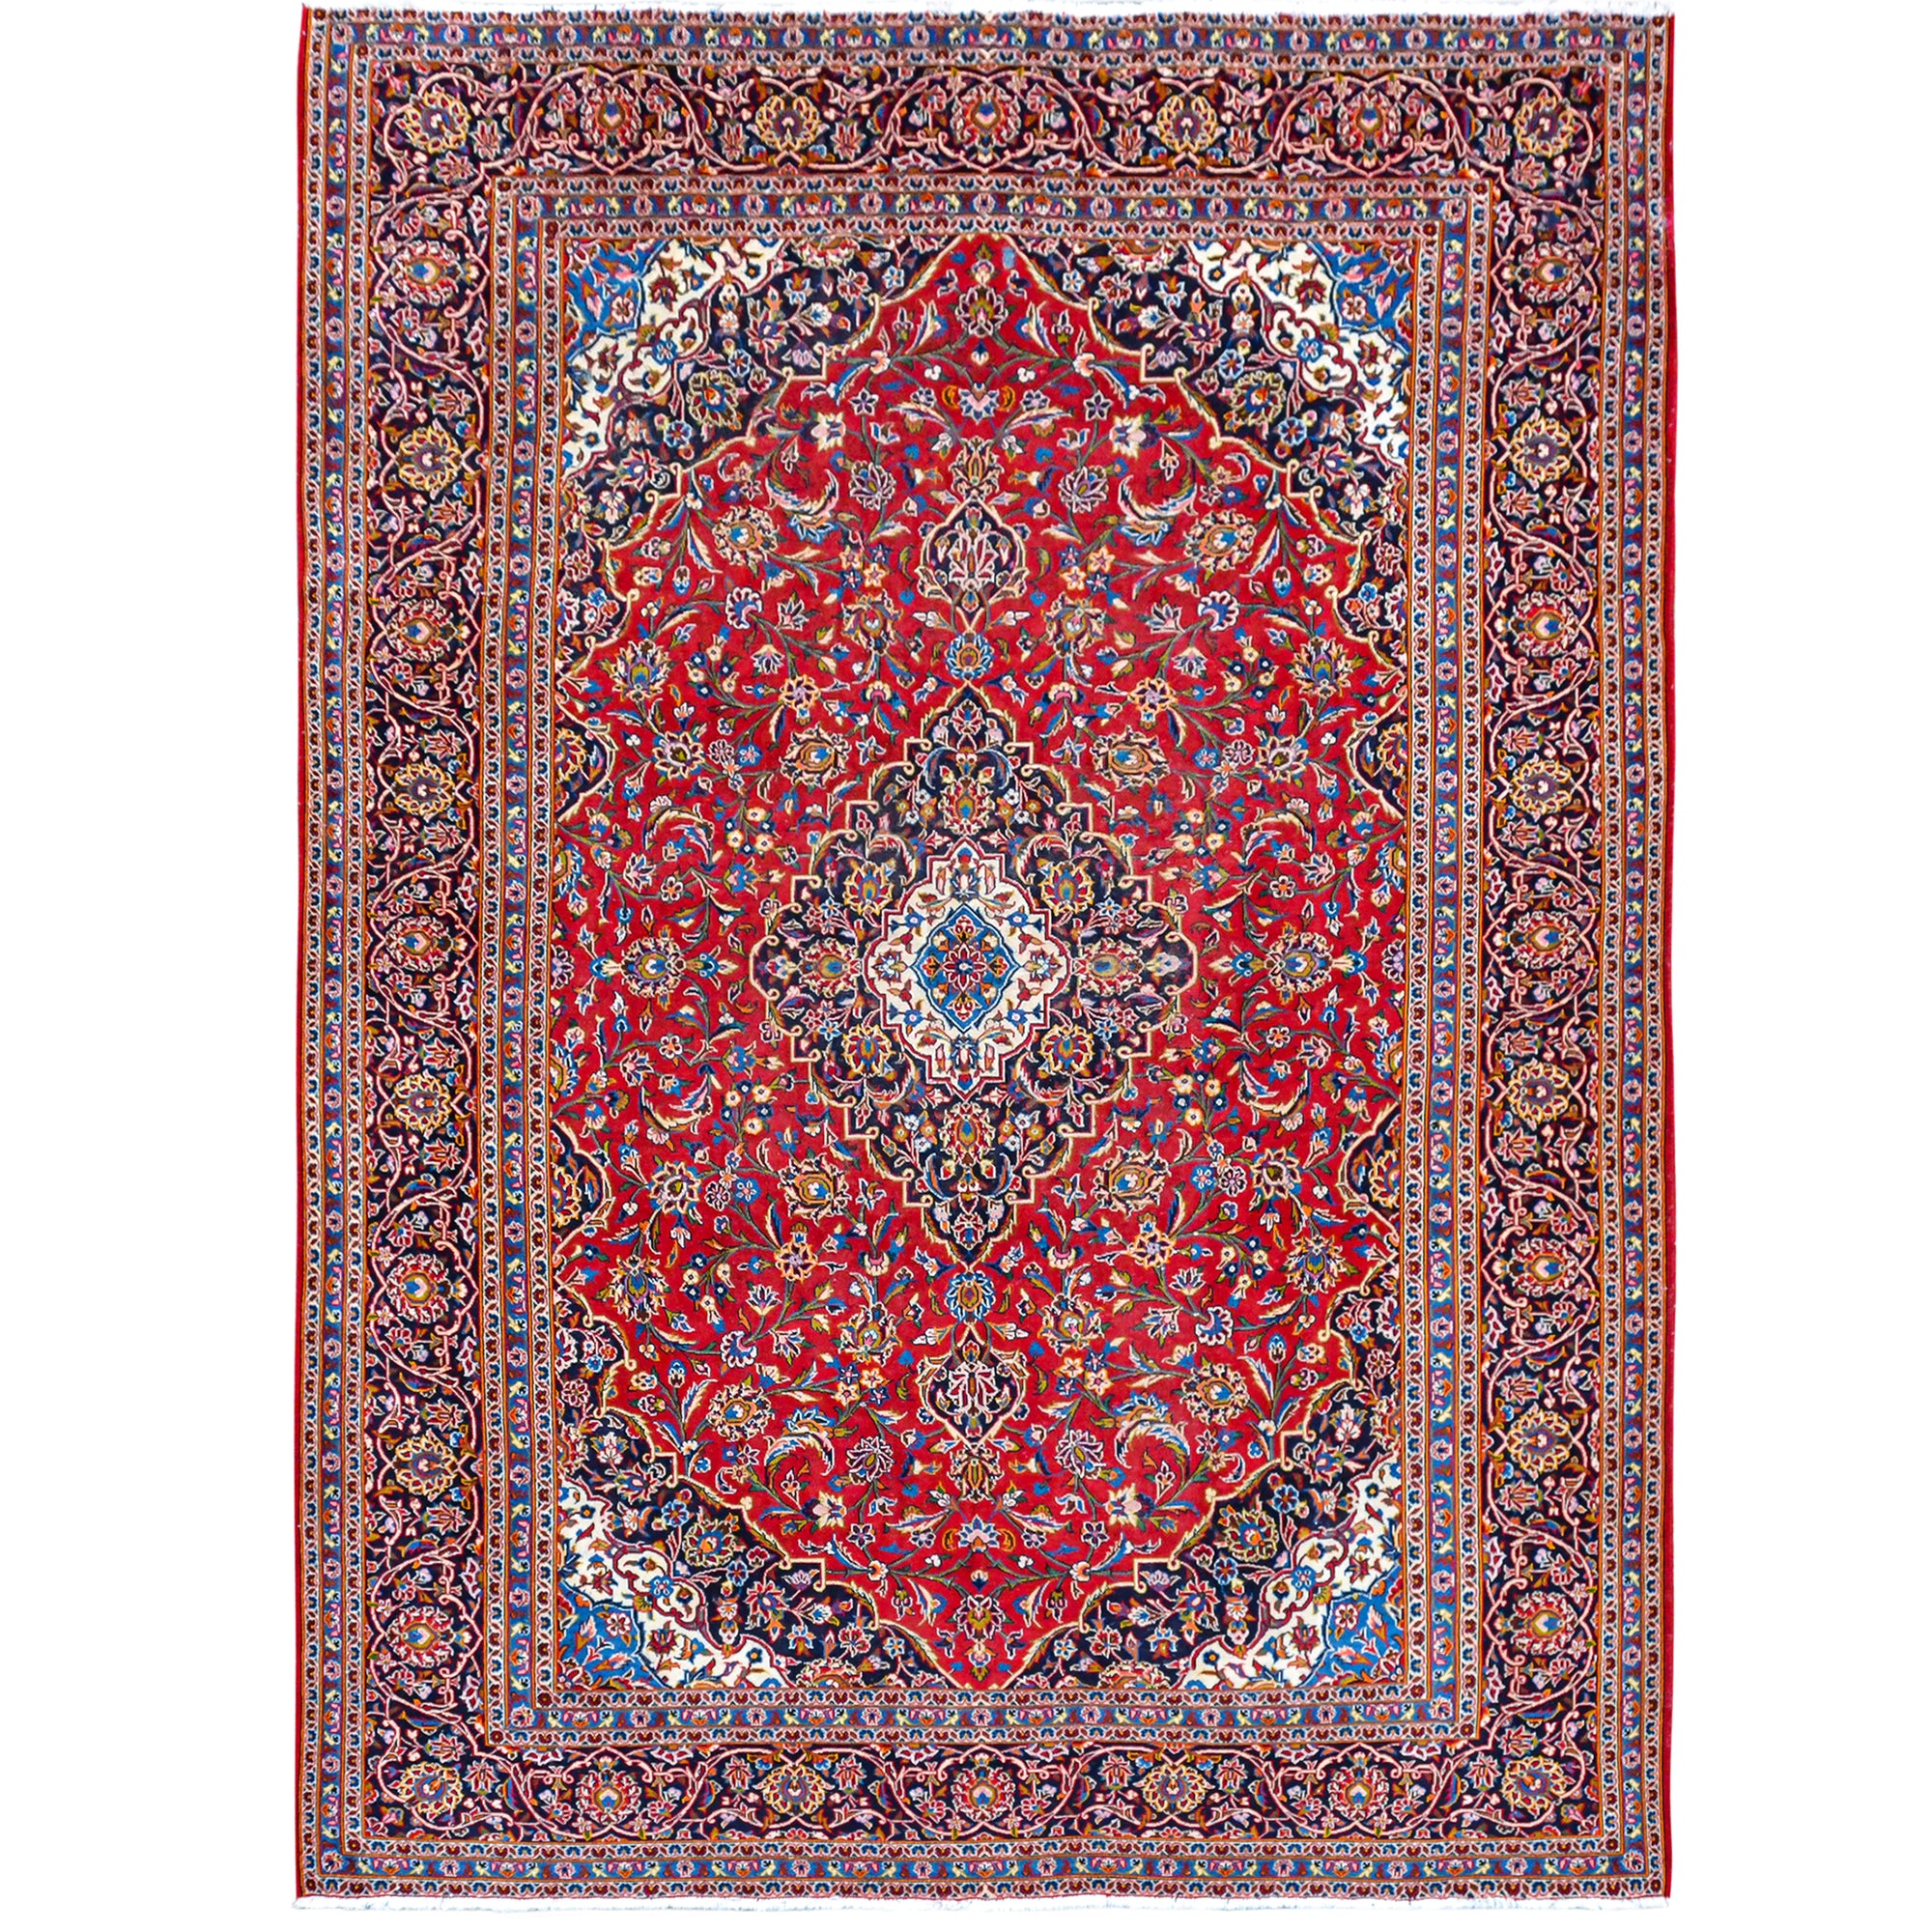 Fine Hand-knotted Kashan Persian Rug 300cm x 390cm